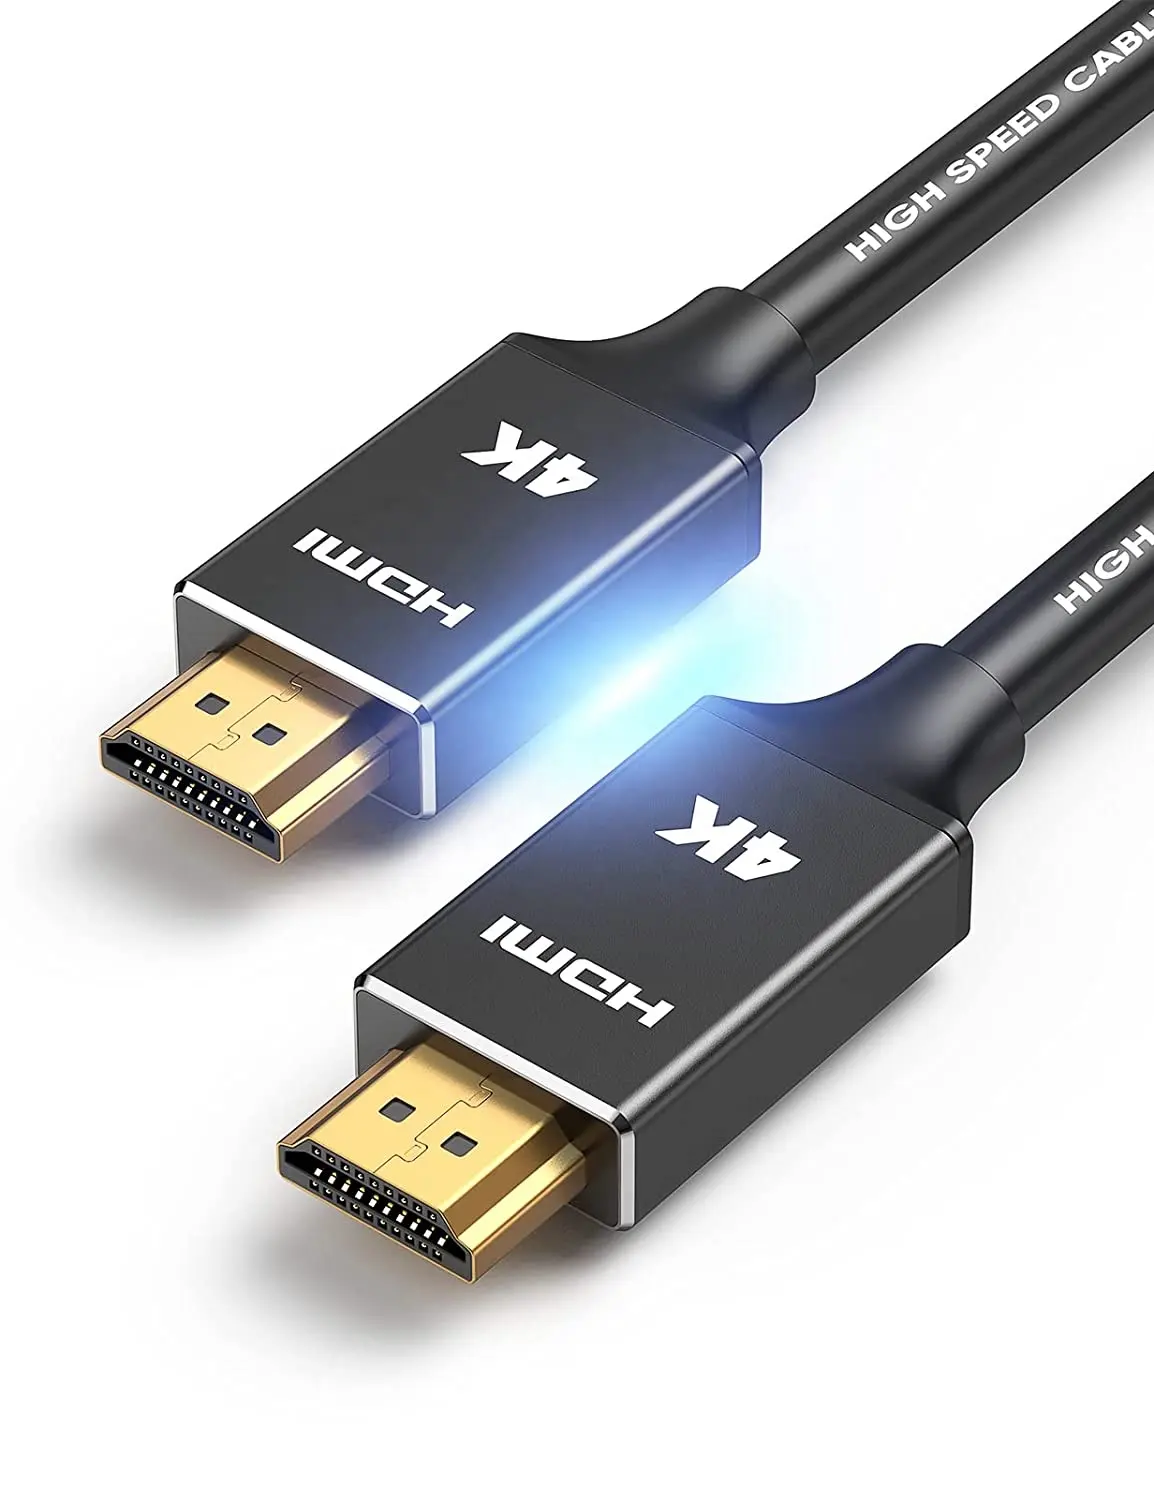 Latest Products 4K HDMI 2.0 Cable Aluminum Alloy Gold Connector High Speed 18Gbps for Apple TV 4K HDTV Xbox PS5 1M 2M 3M 5M